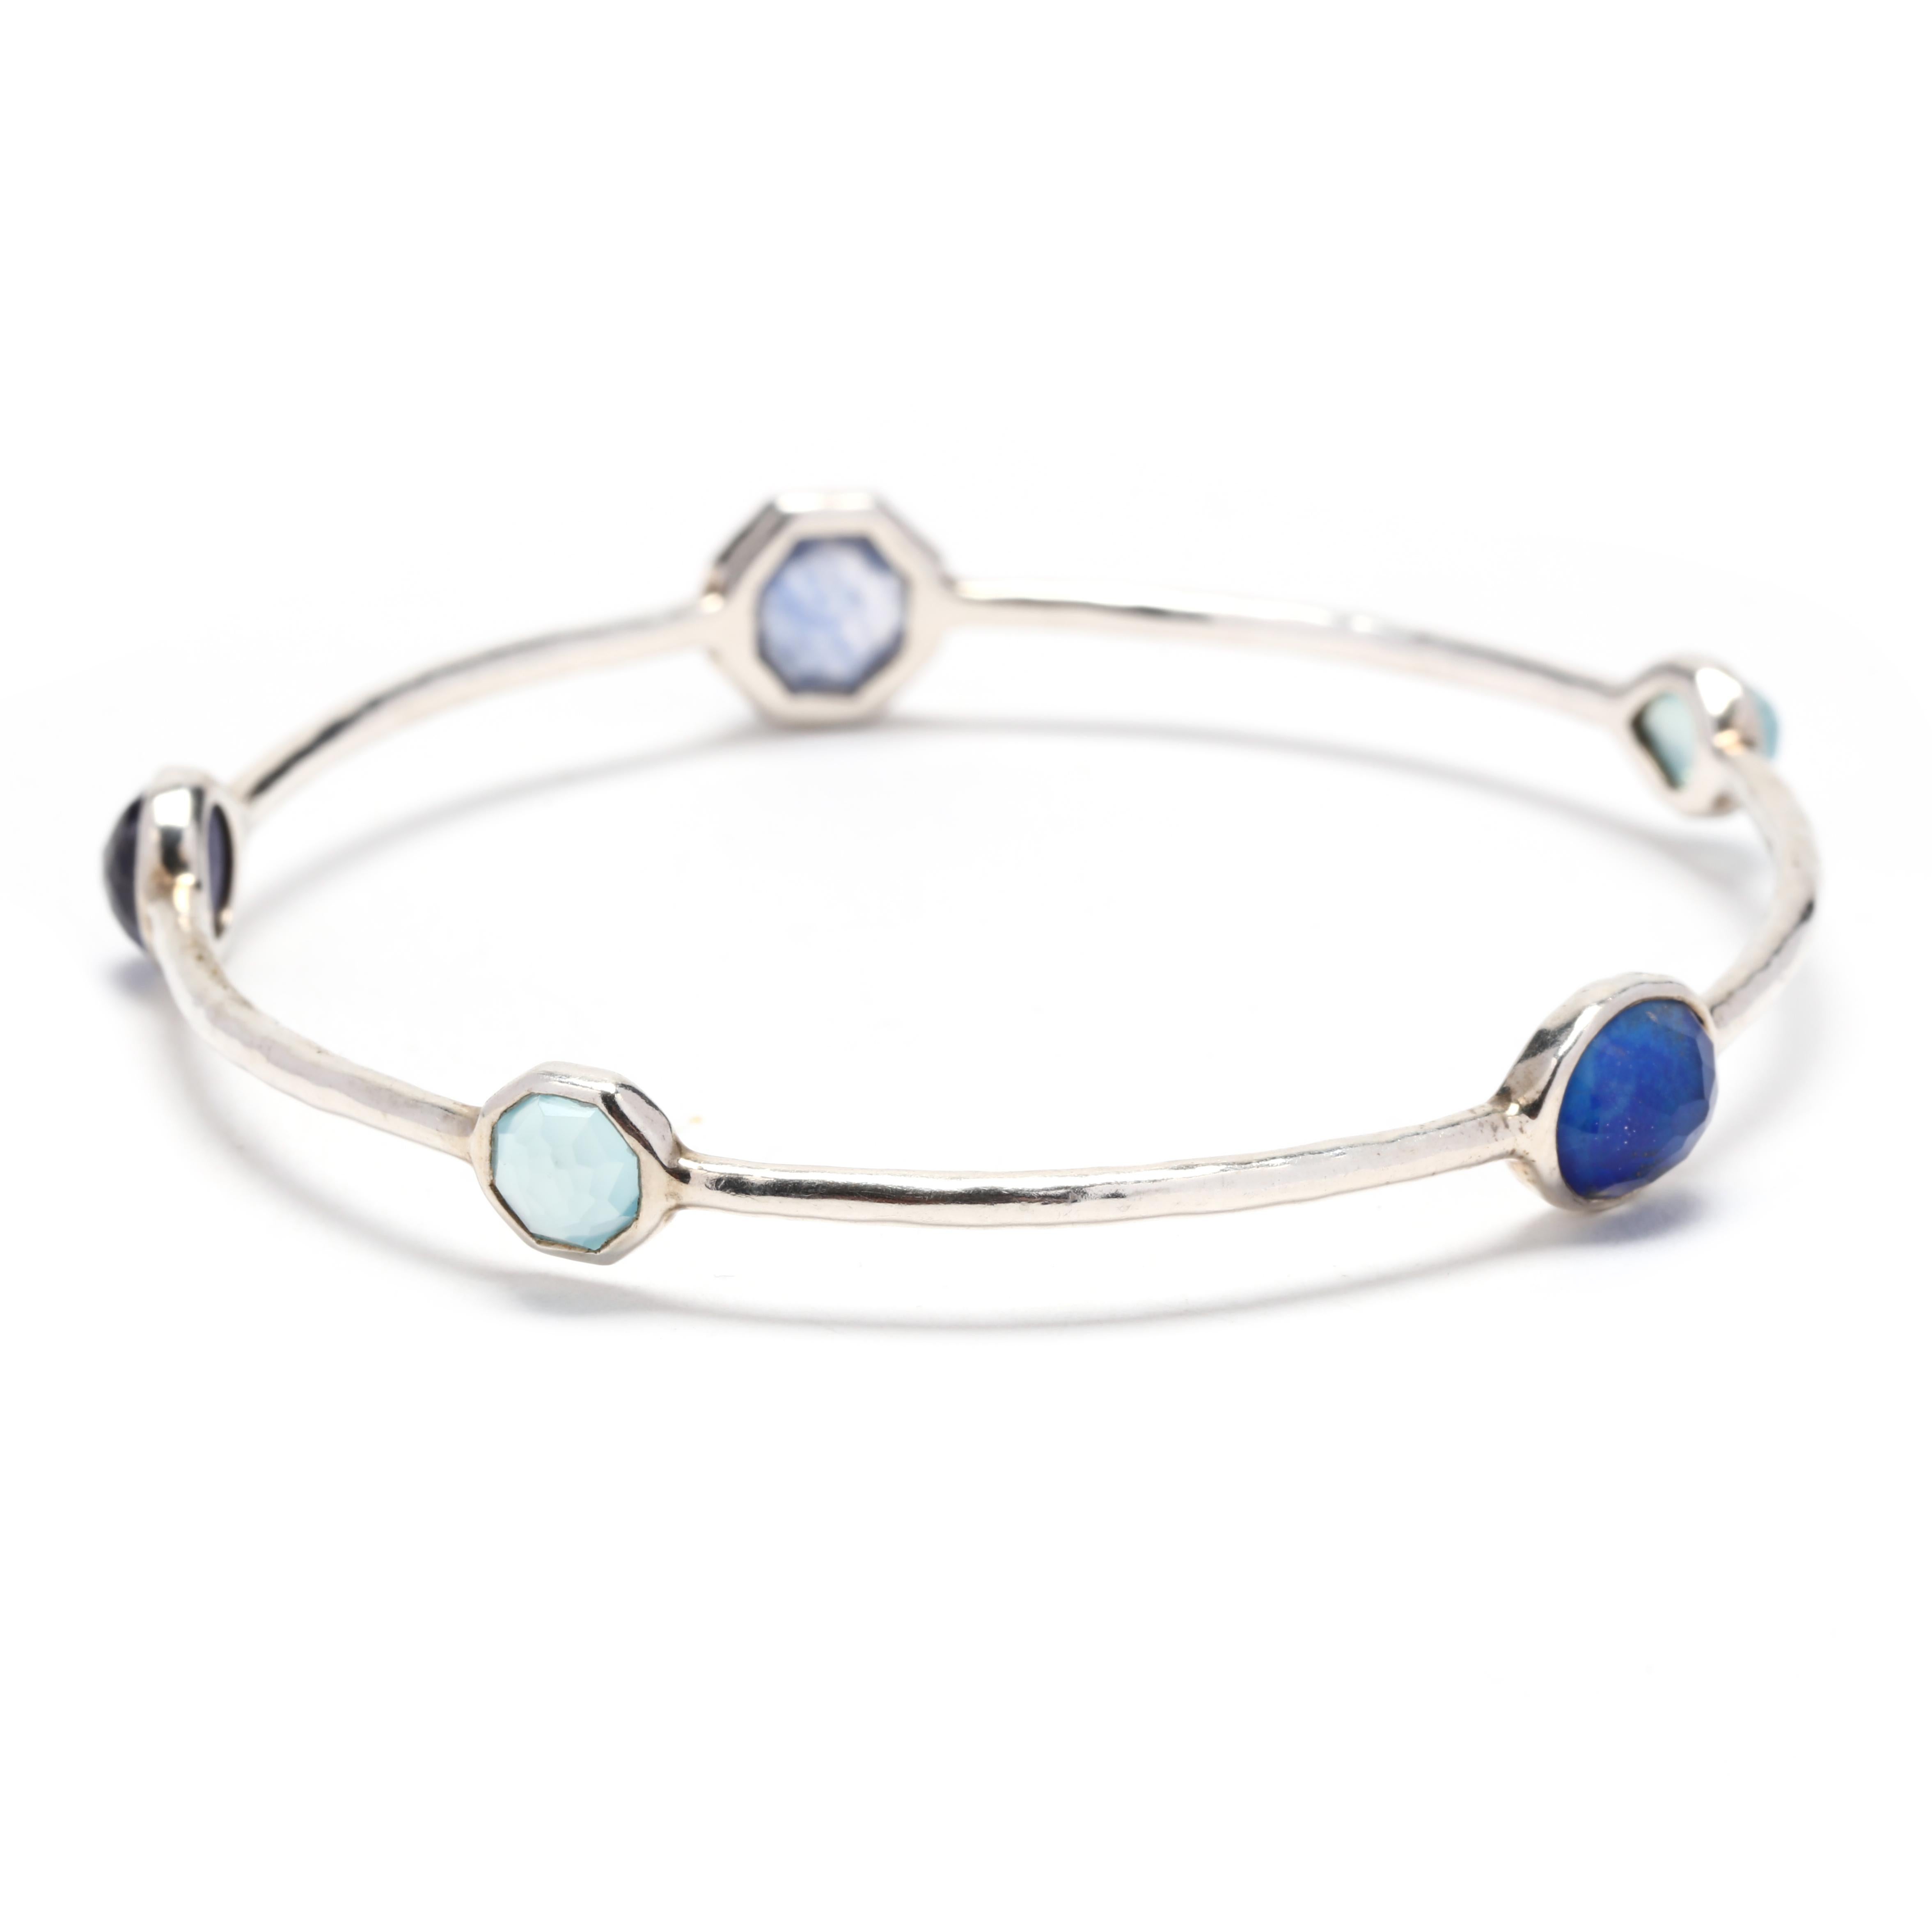 This Ippolita Rock Candy Blue 5 Stone Bangle Bracelet is a stunning piece of jewelry that is sure to make a statement. Made of high-quality sterling silver, this bracelet features five beautiful blue gemstones that are sure to catch the light and